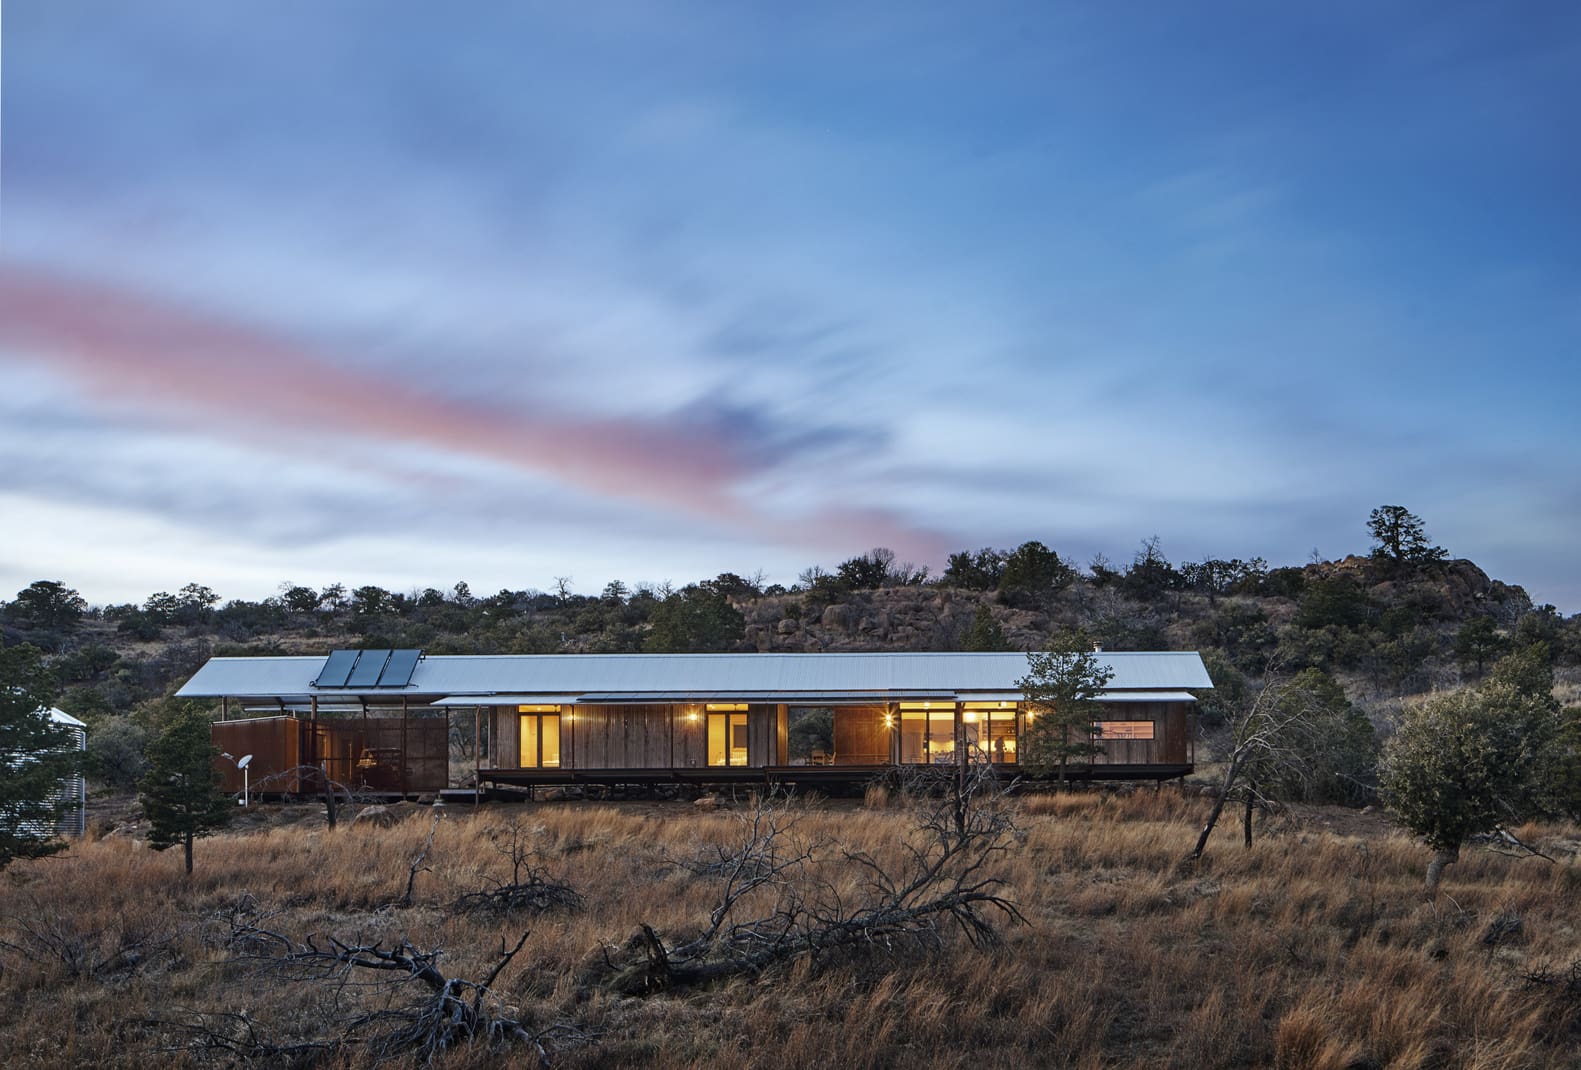 A modern OpenHome from Lake Flato at dusk